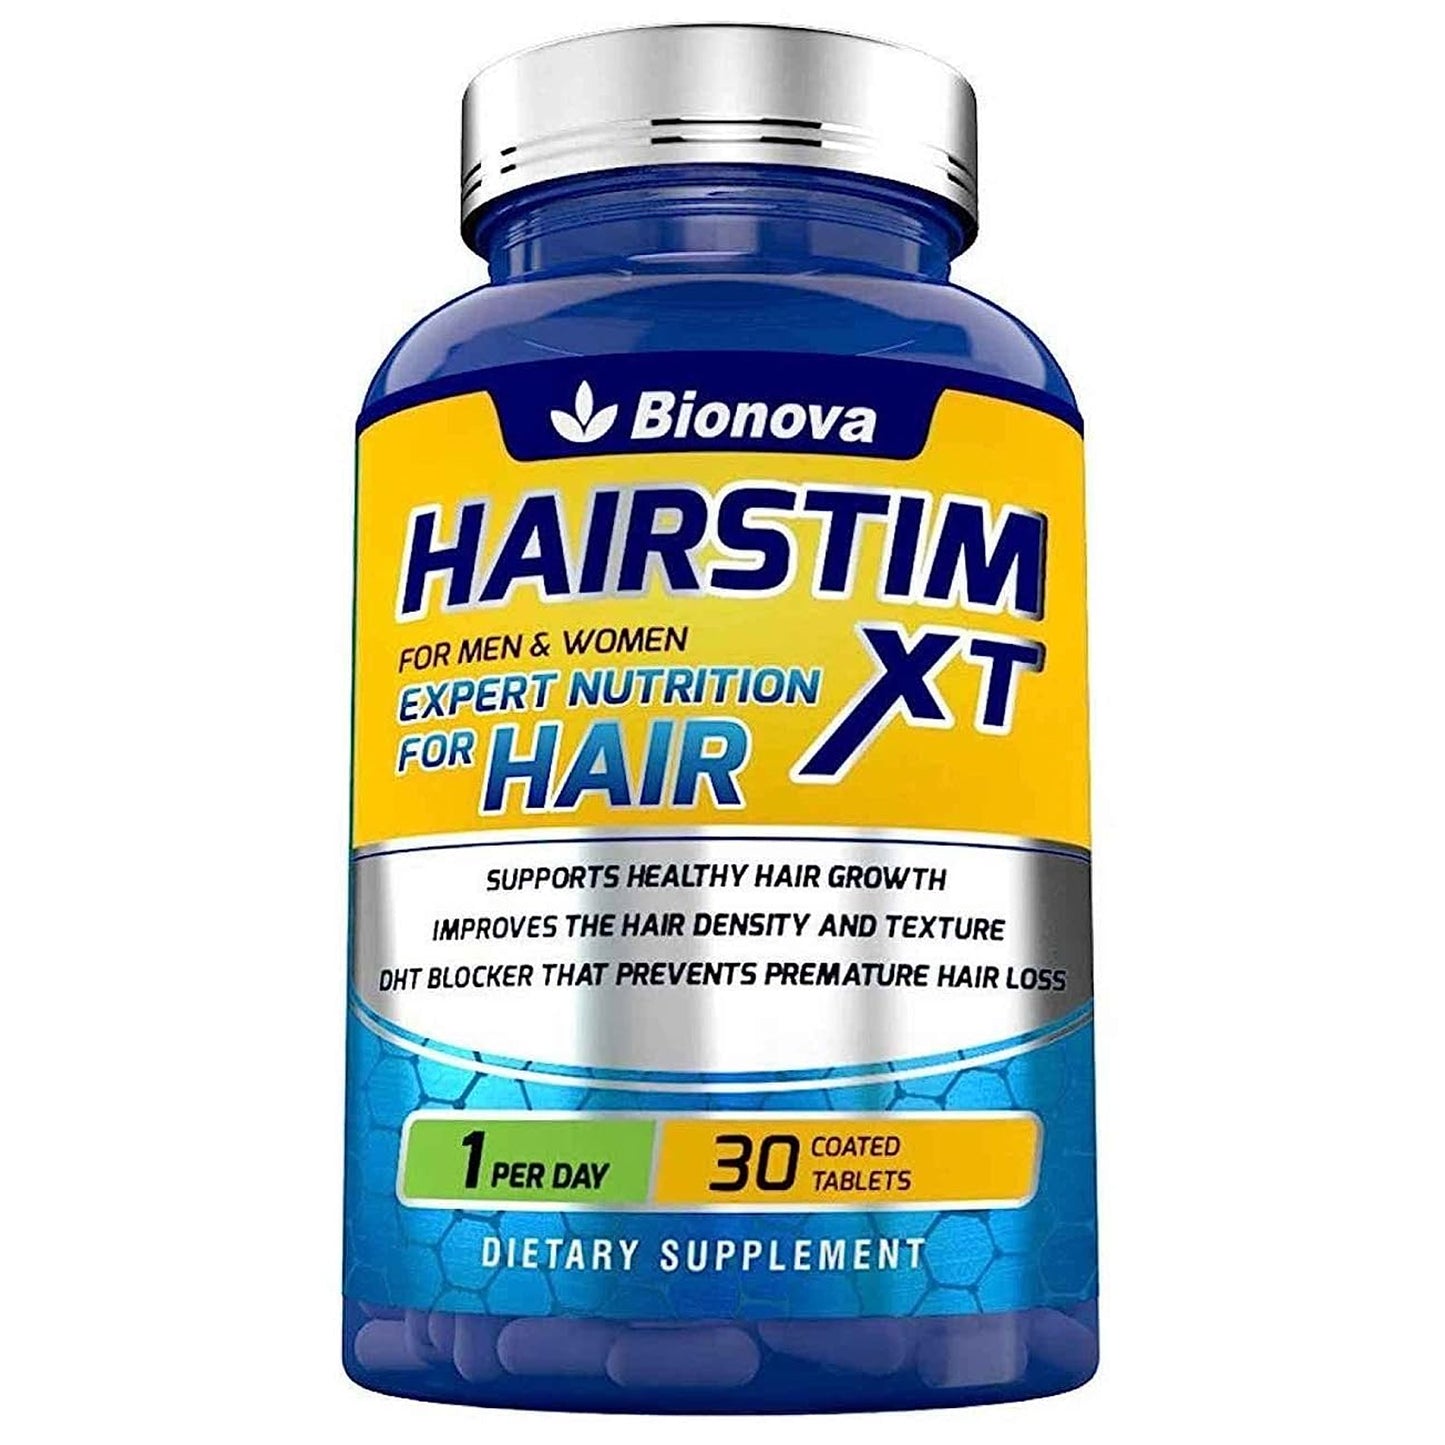 Hairstim XT - Biotin 10,000mcg with Added Nutrients for Hair Growth & Reduced Hair Loss, 30 Tablets